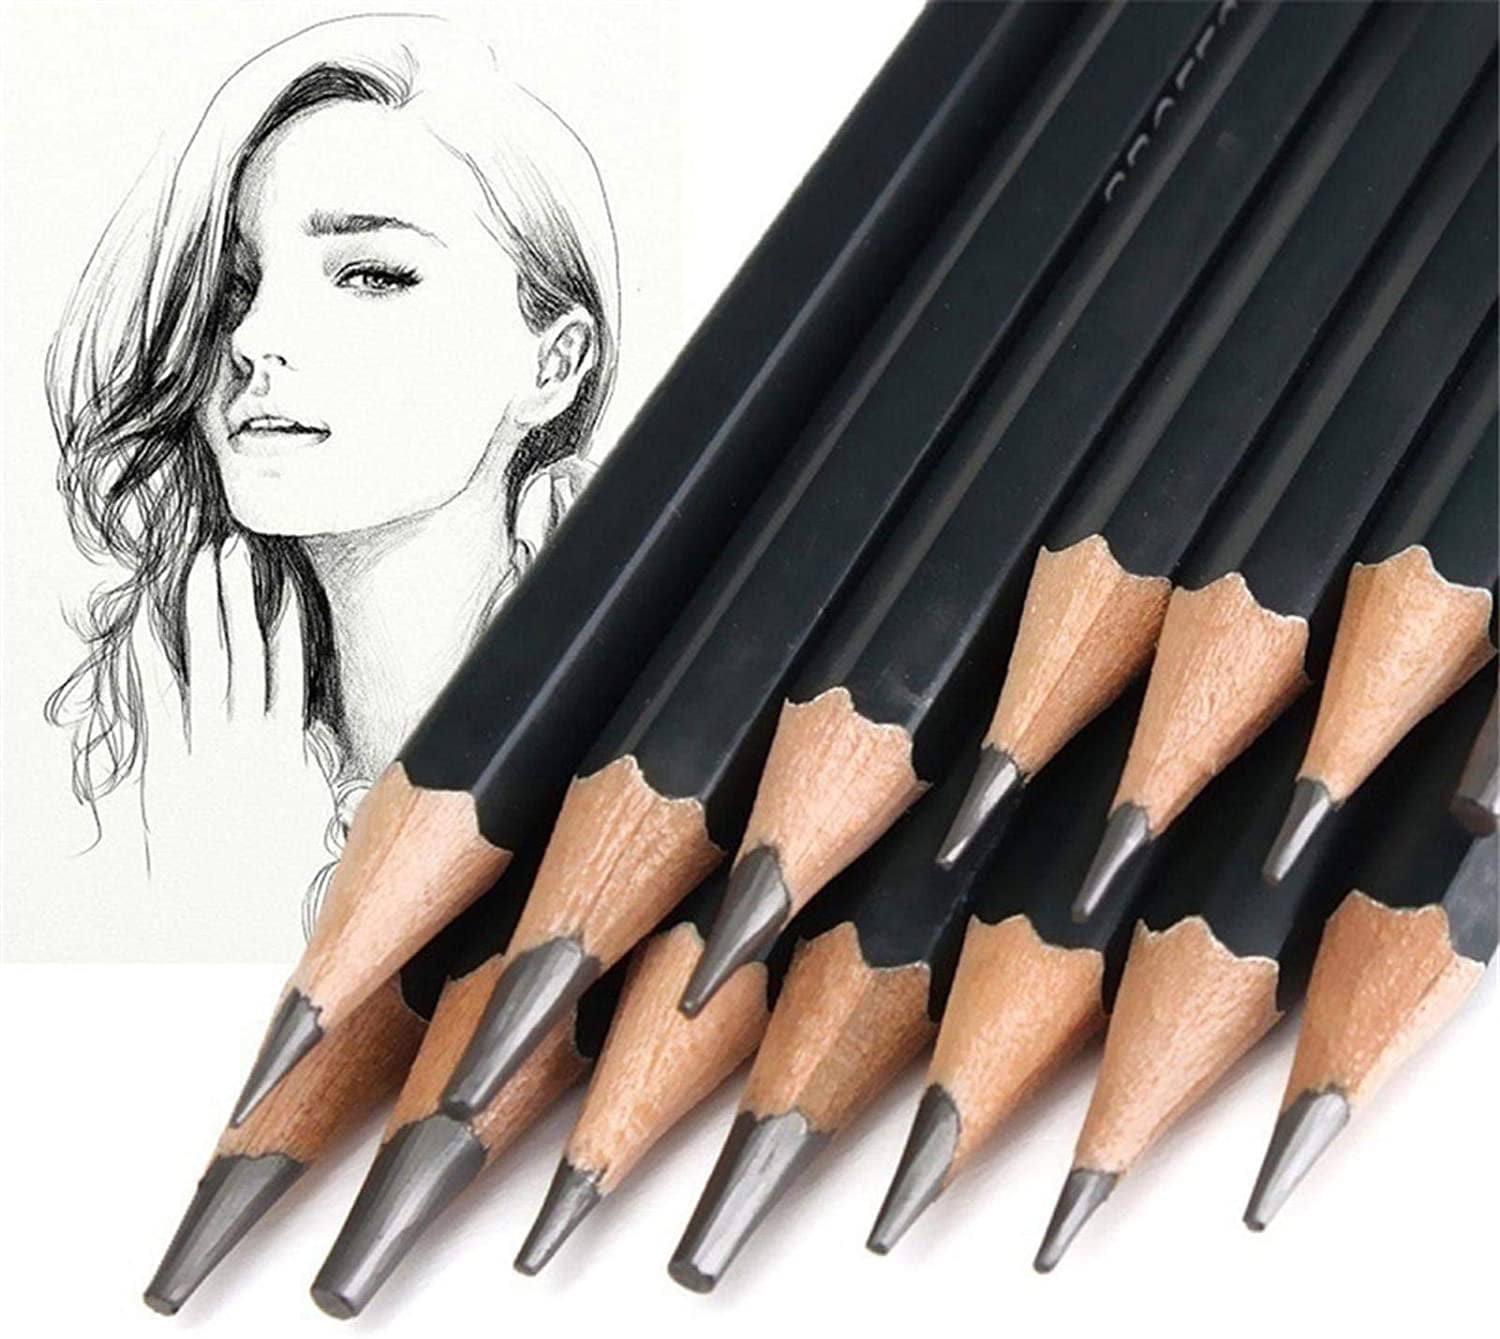 Benefits of Drawing with Pencils: The Advantages and Di